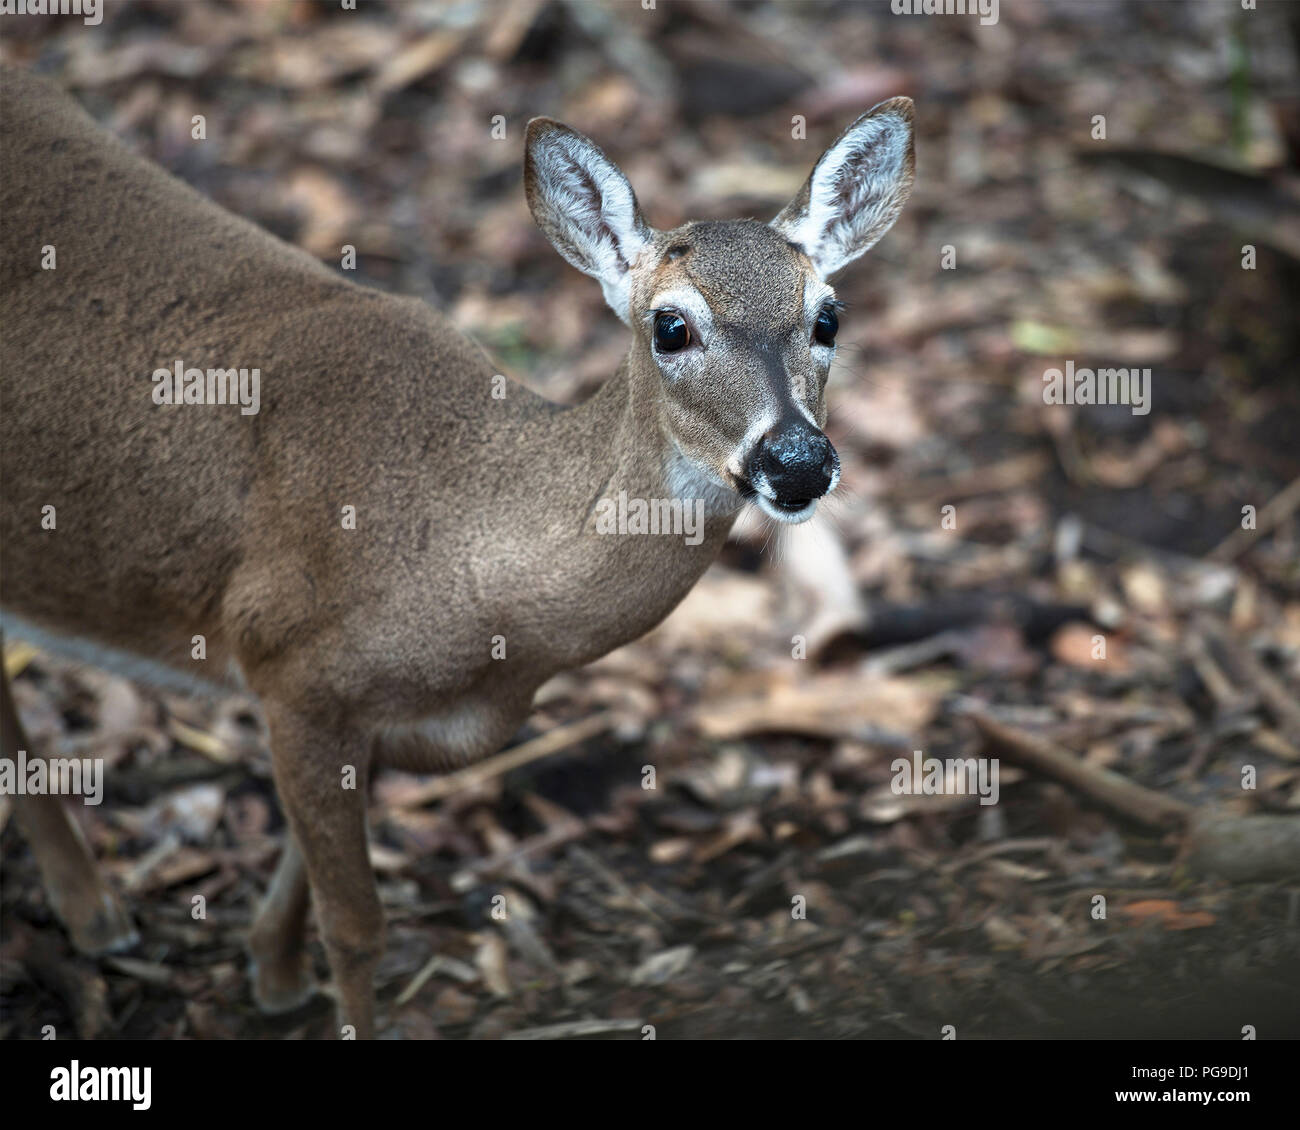 Deer Florida Key Deer animal close-up head view, ears, eyes, nose, legs in its environment and surrounding with a bokeh background. Picture. Image. Stock Photo